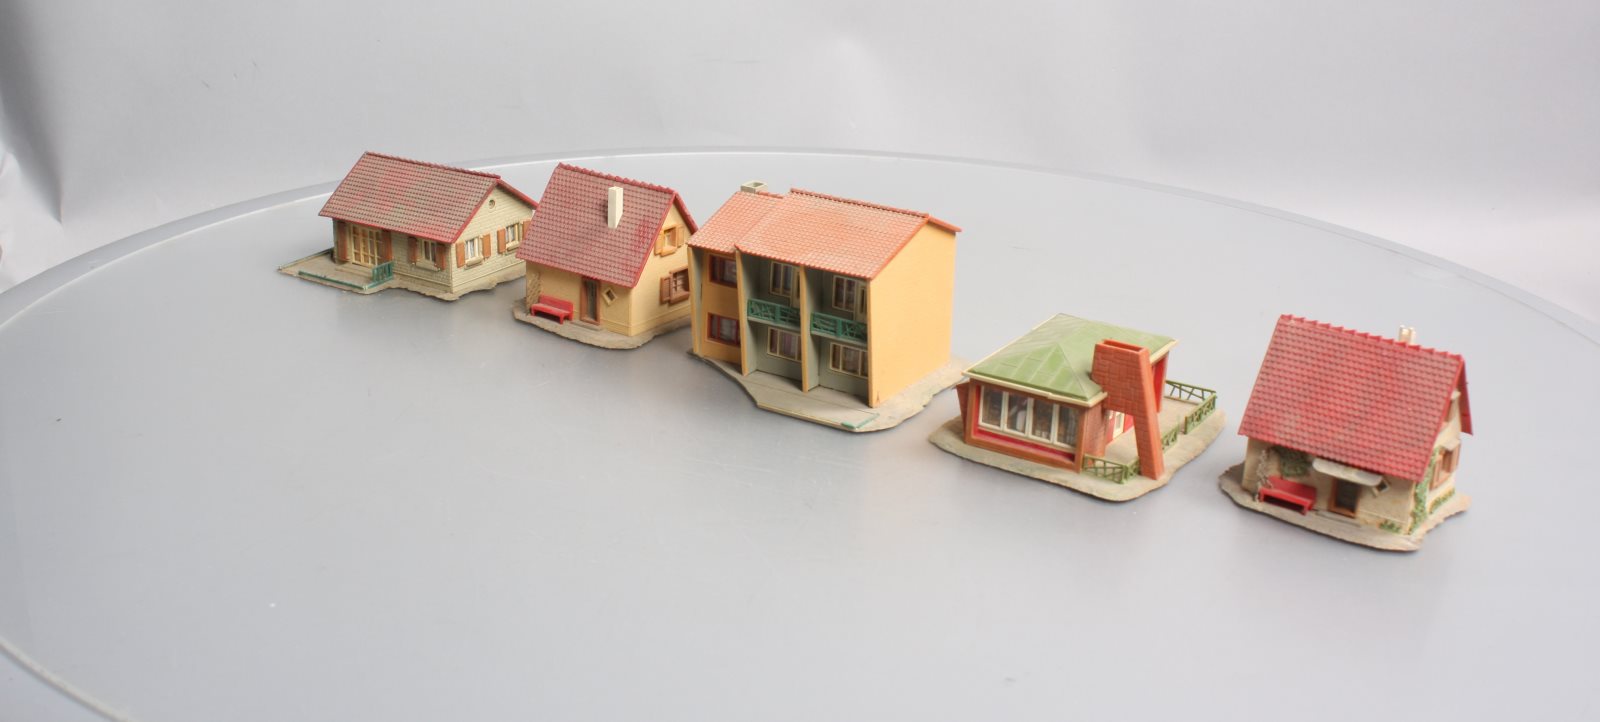 Faller HO Scale Assorted Plastic Buildings and Houses [5] VG